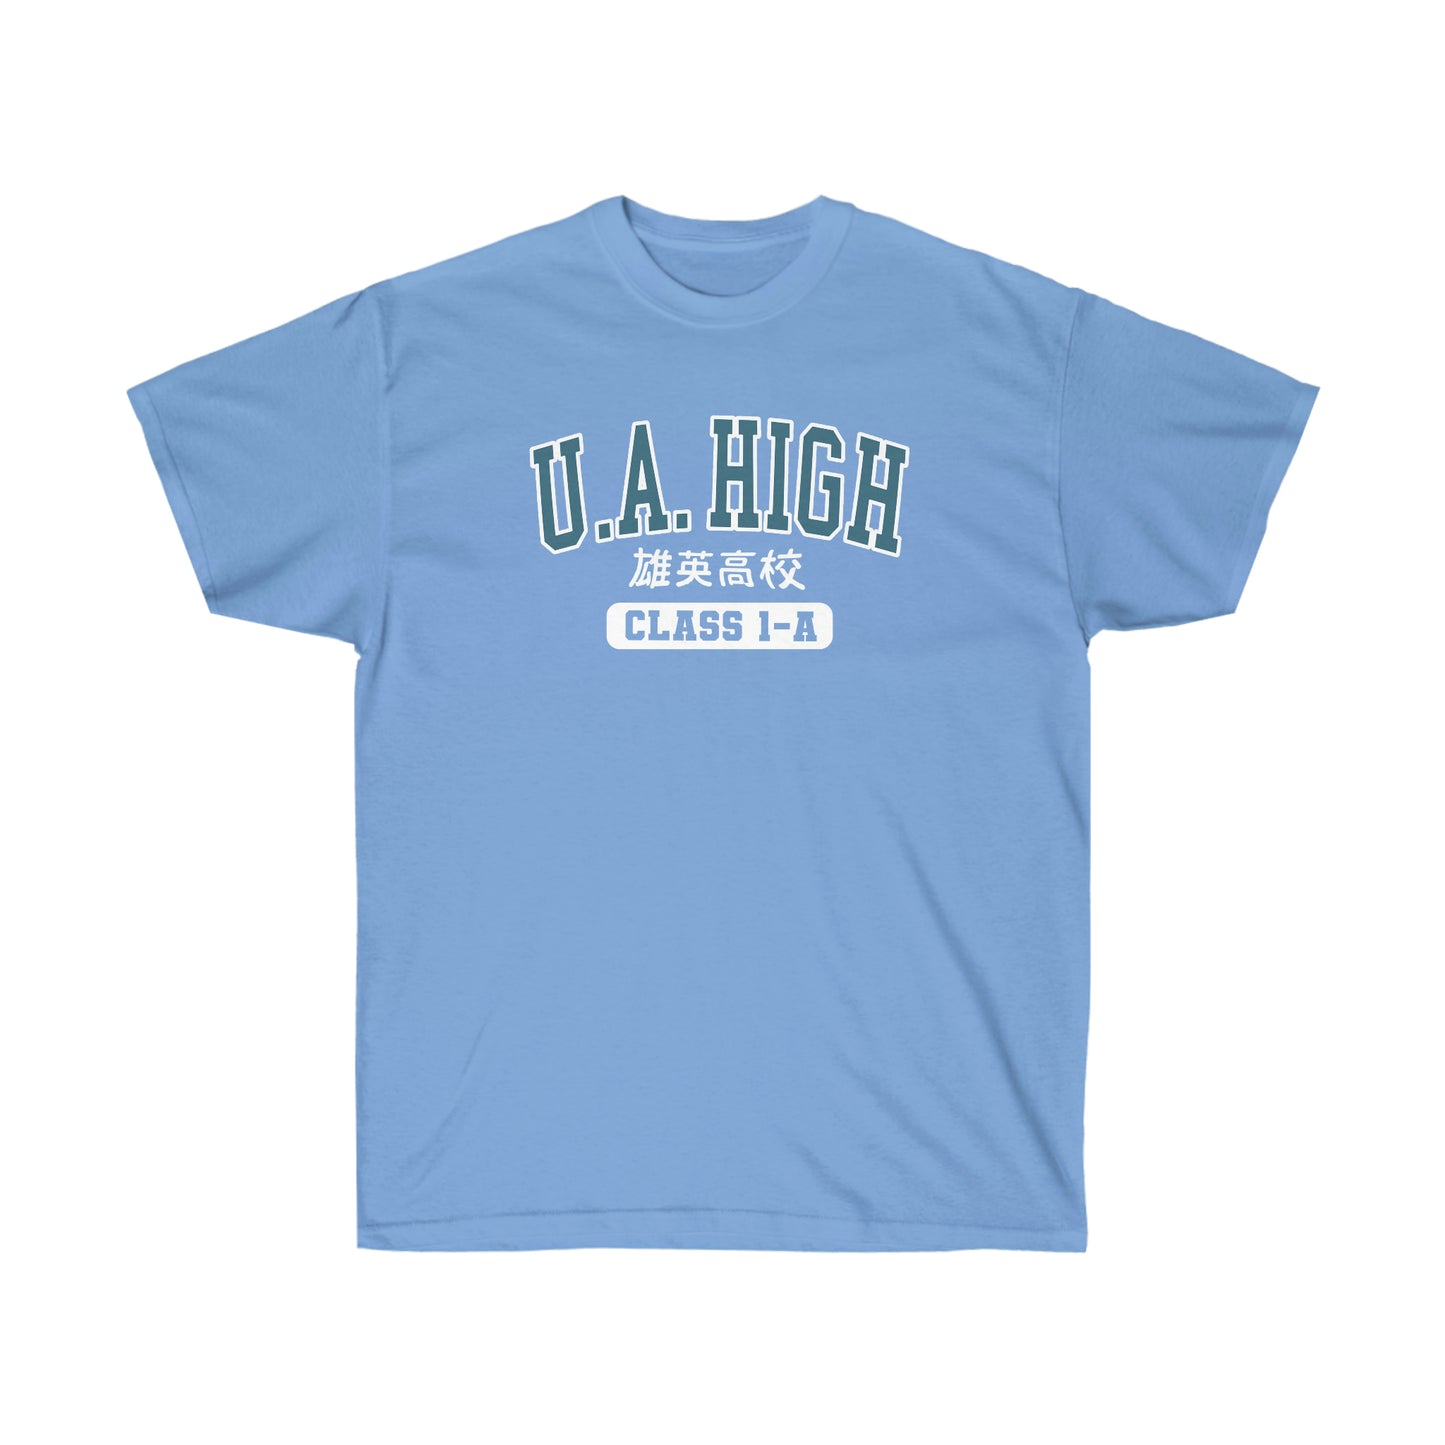 UA High Property of UA Academy t-shirt Japan anime tee gifts for her gifts for him fan